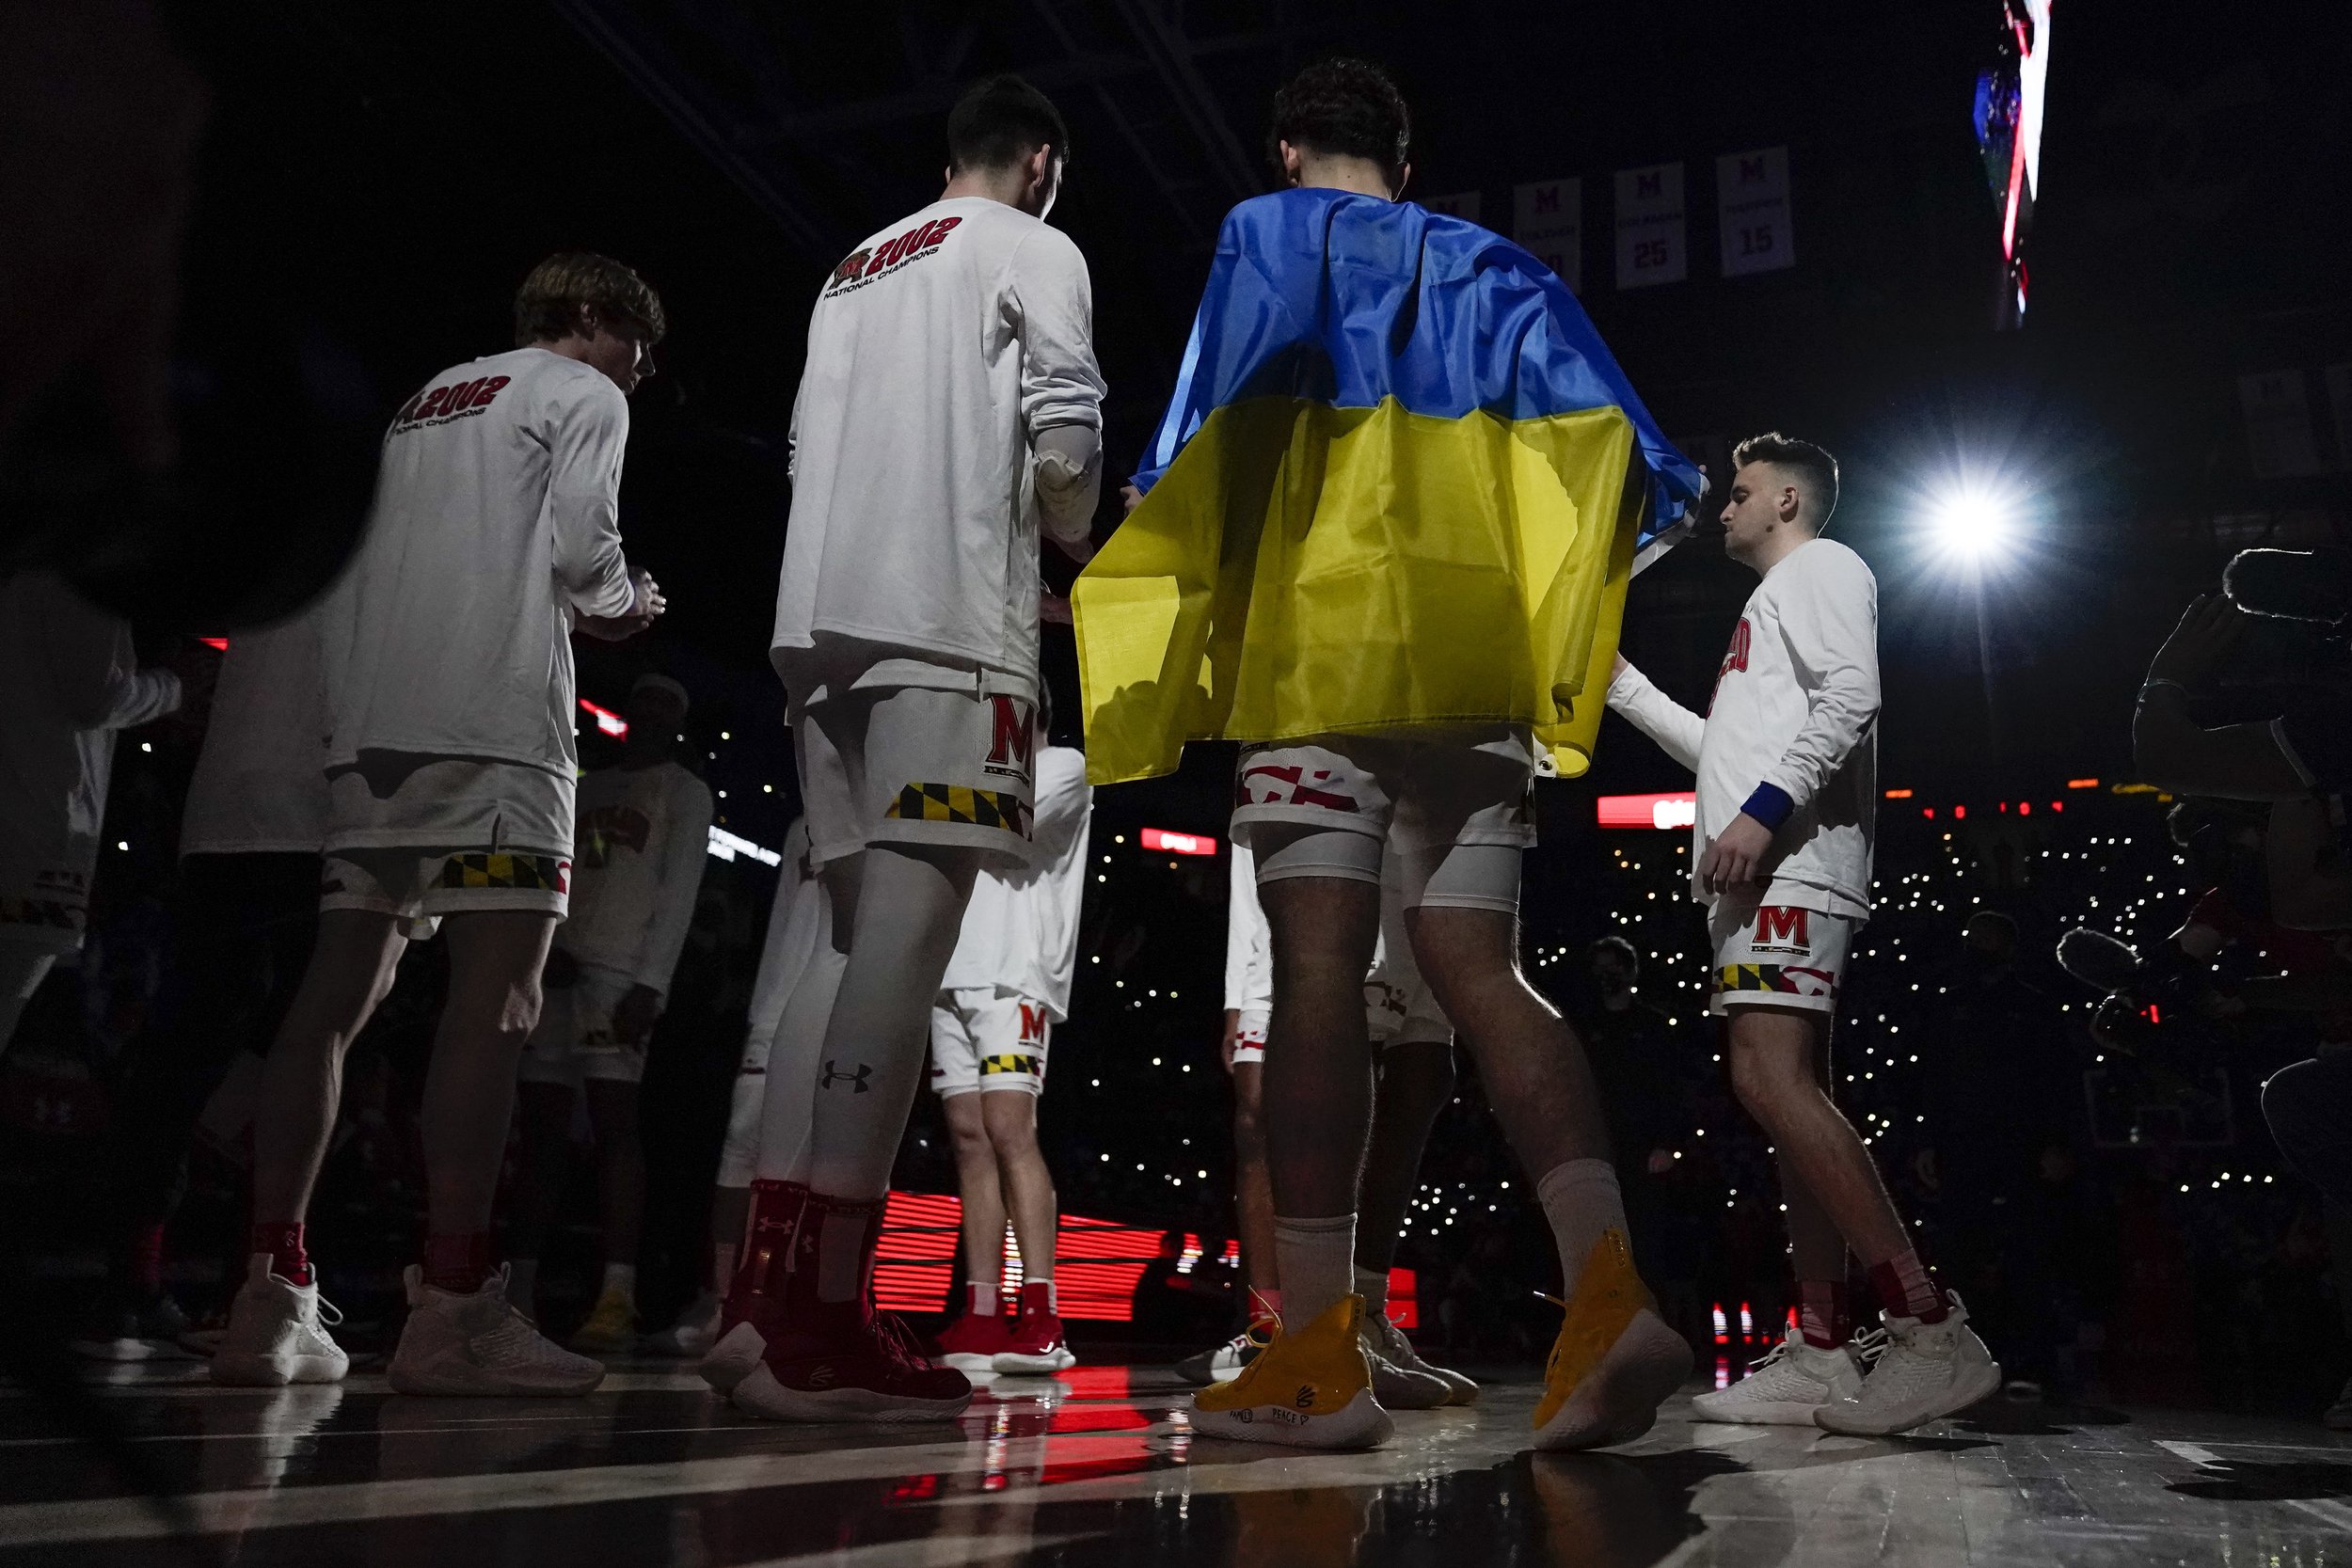  Maryland forward Pavlo Dziuba, front right, who was born in Kyiv, Ukraine, is draped in a flag of Ukraine prior to an NCAA college basketball game against Ohio State, Sunday, Feb. 27, 2022, in College Park, Md. (AP Photo/Julio Cortez) 